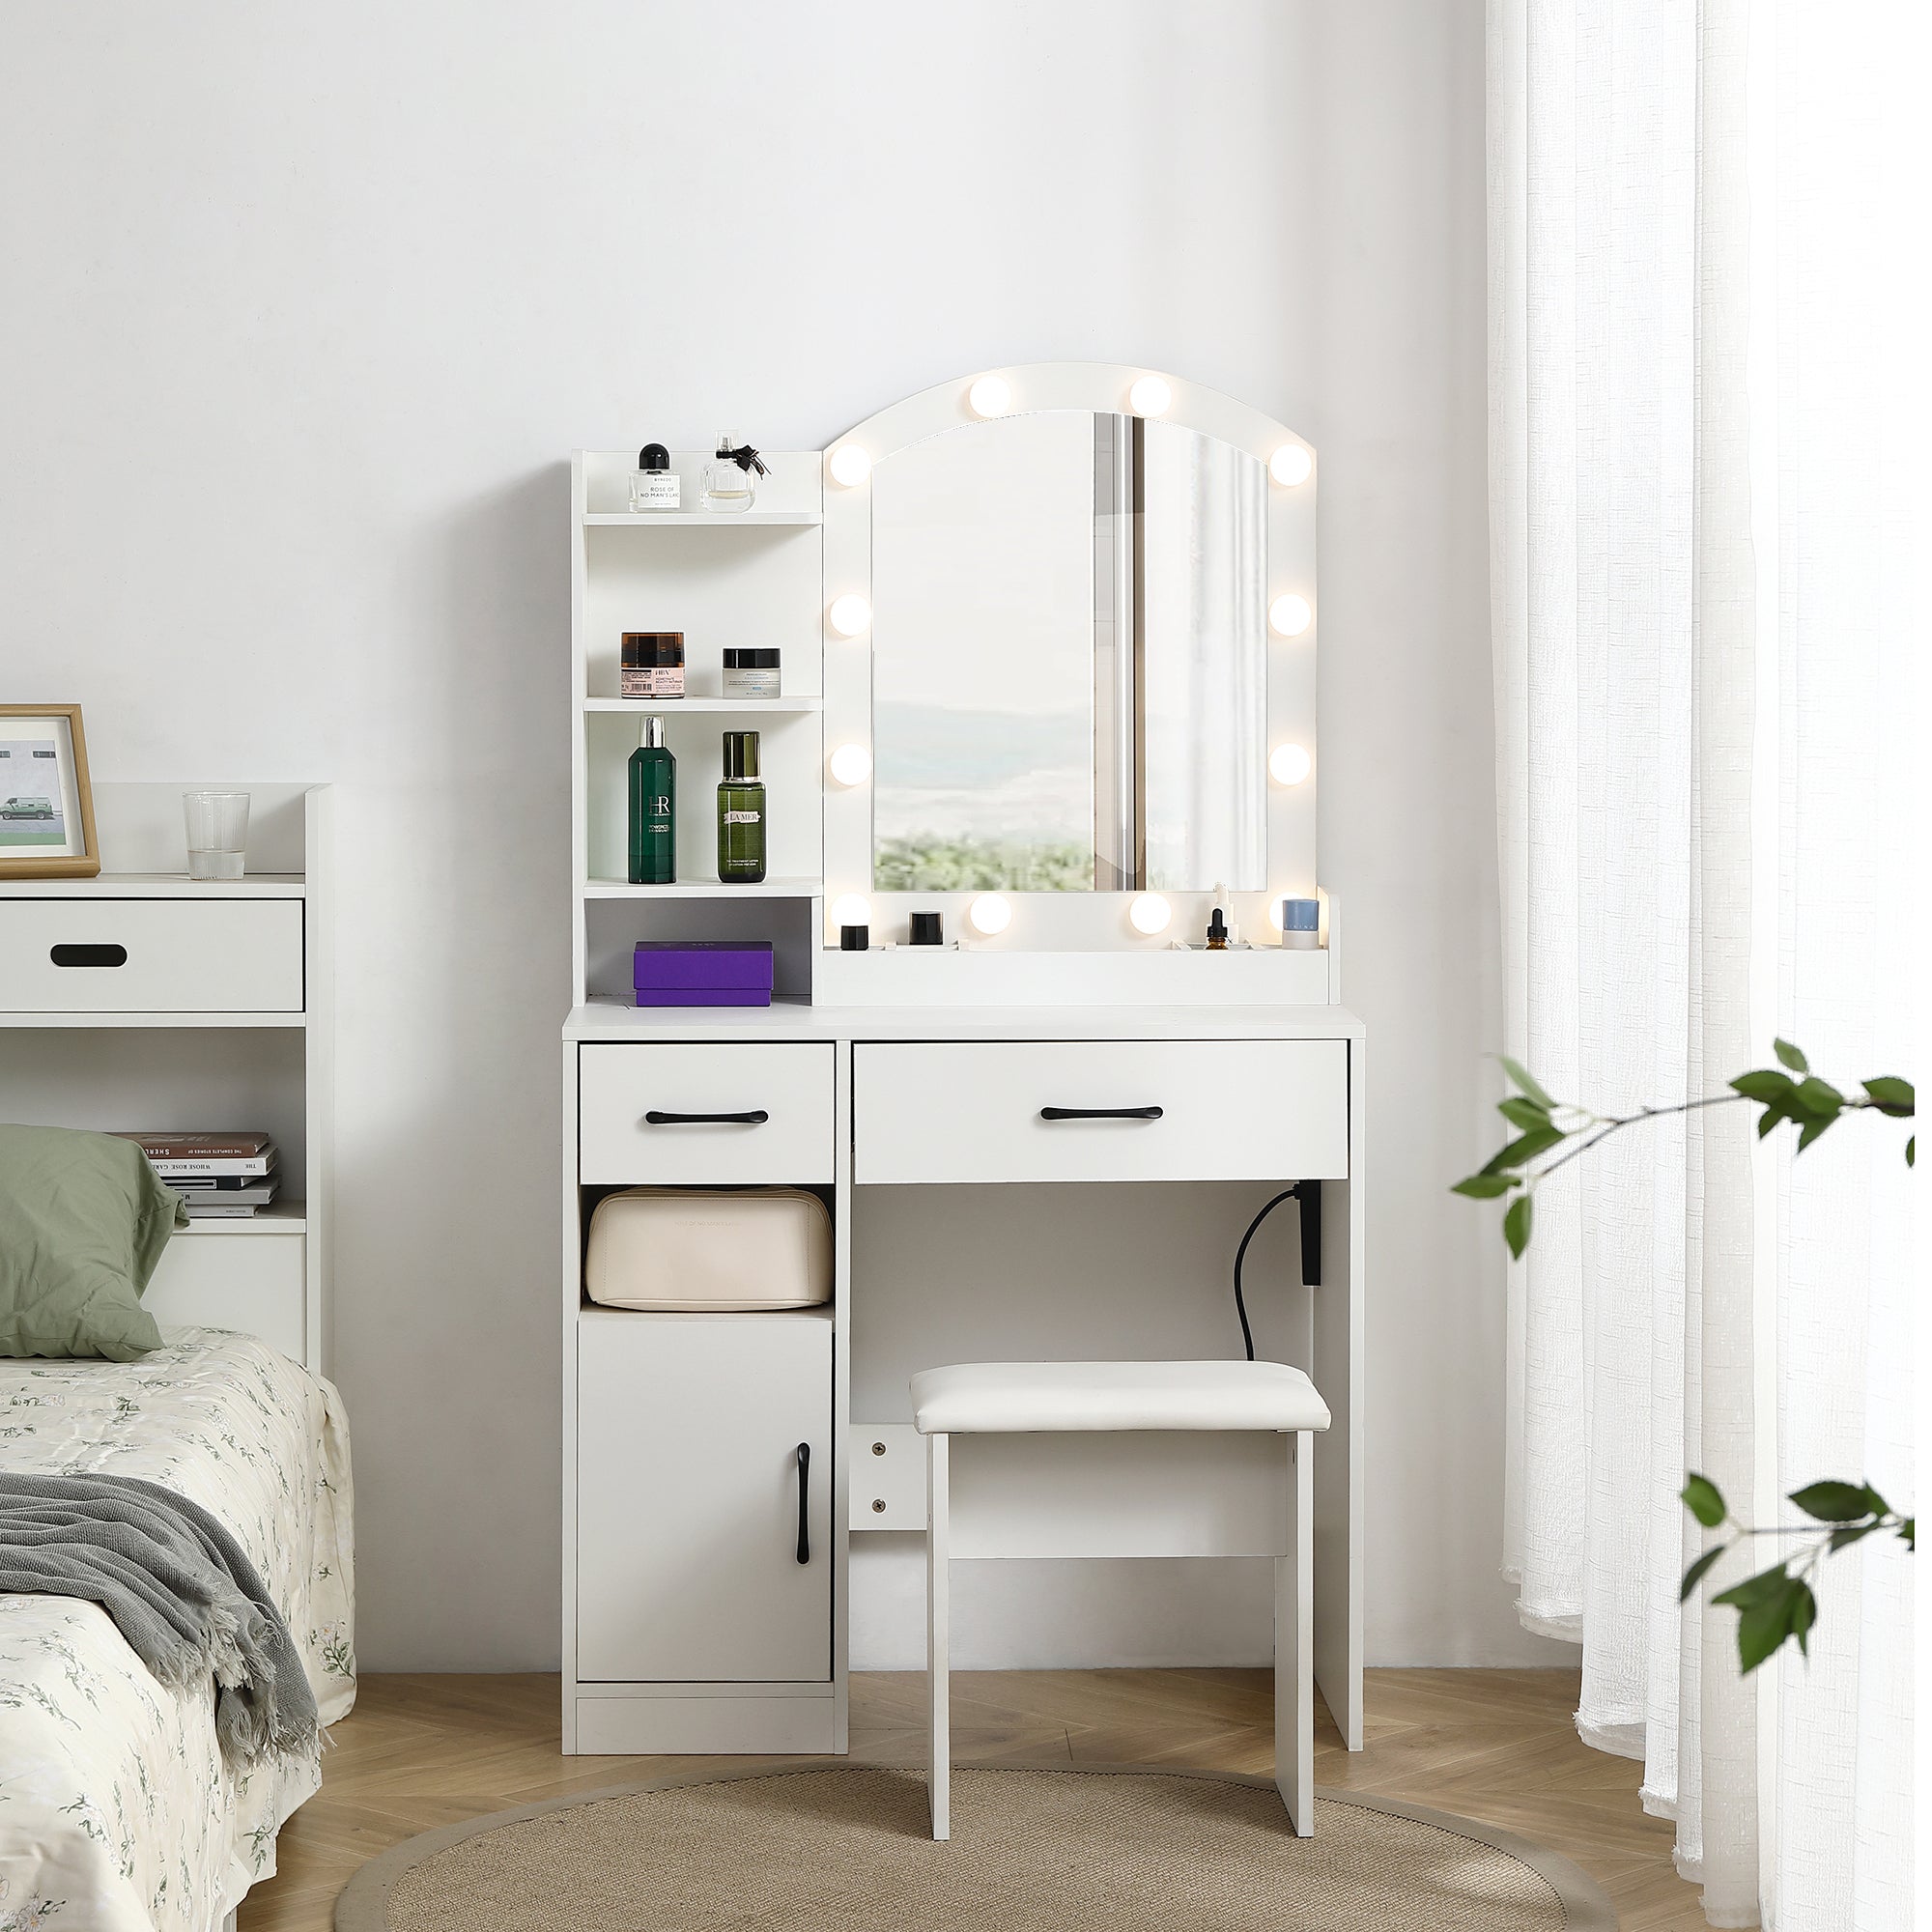 Vanity-desk-set-including-table-with-large-lighted-mirror,3-color-lighting-modes-adjustable-brightness,-dressing-table-with-2-drawers,-storage-cabinet-and-upholstered-stool,-white-color-VANITY